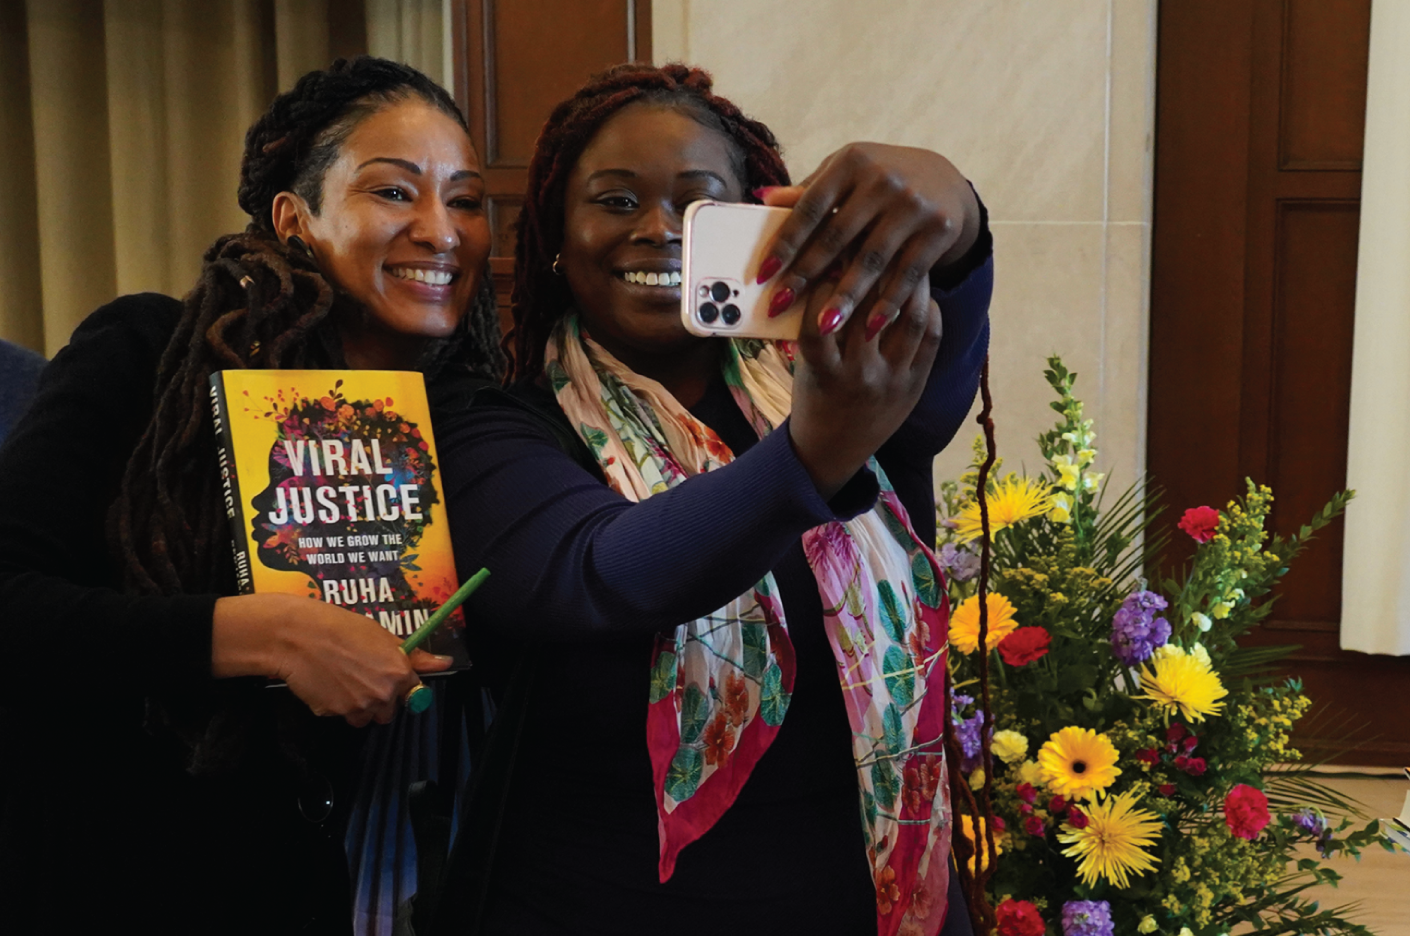 Two people take a selfie. One is holding the book Viral Justice.